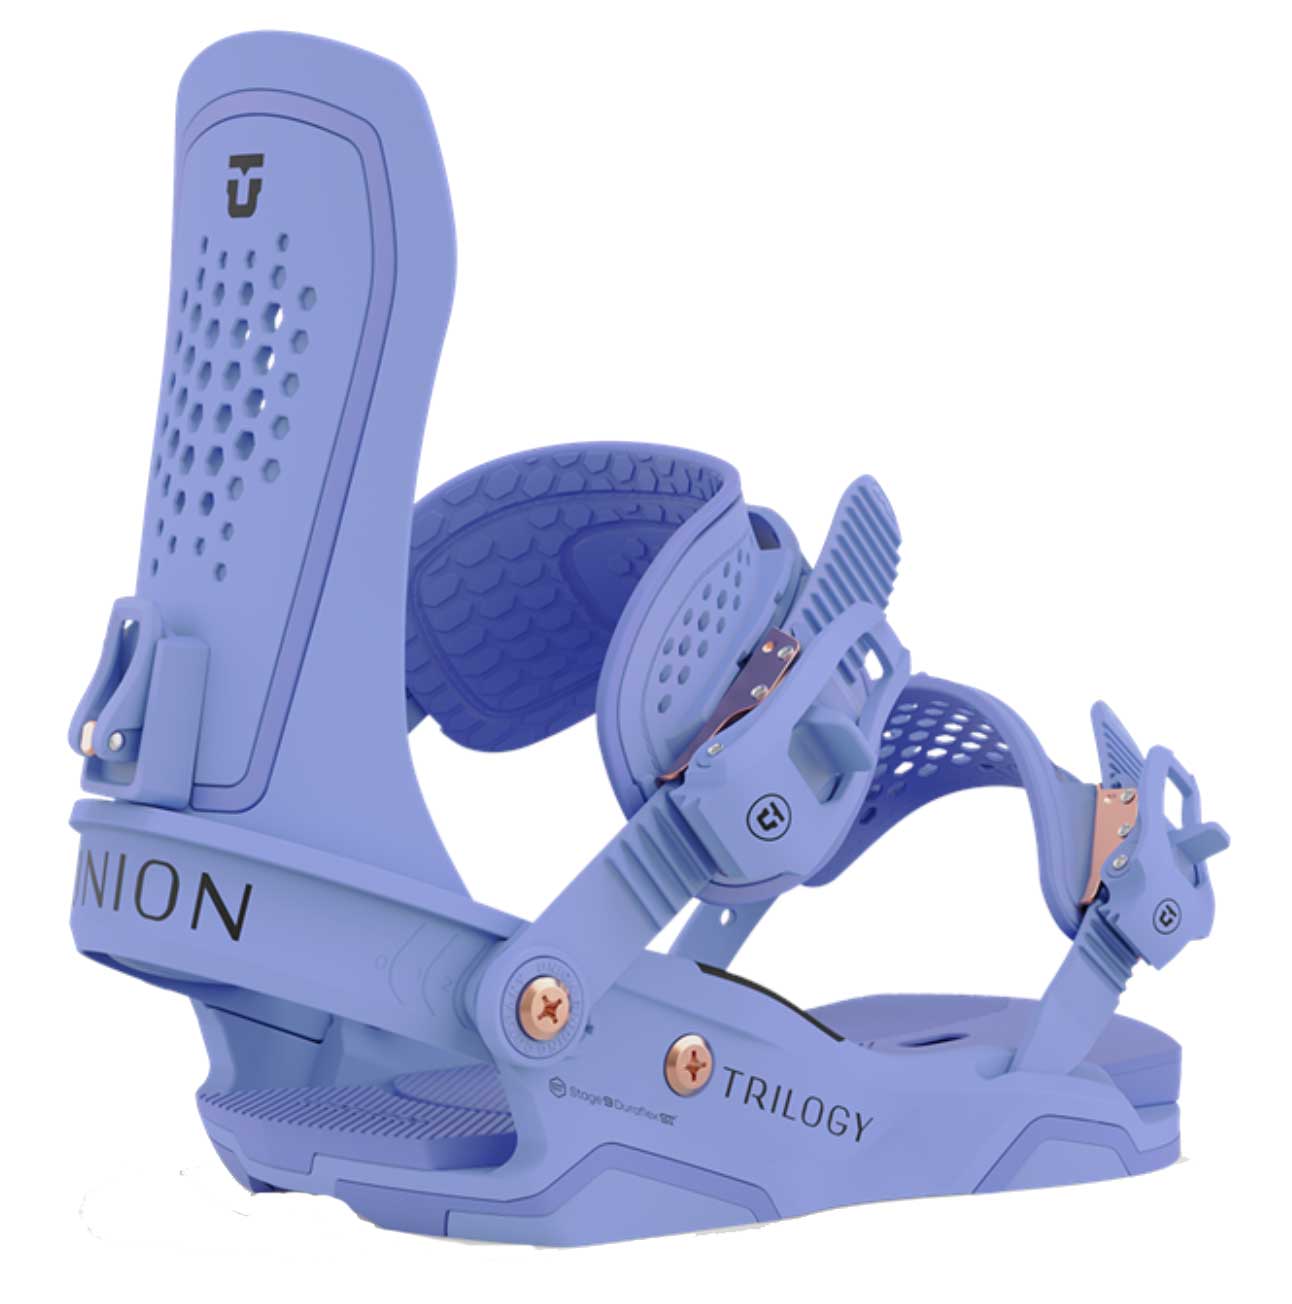 Union Trilogy Snowboard Binding Review